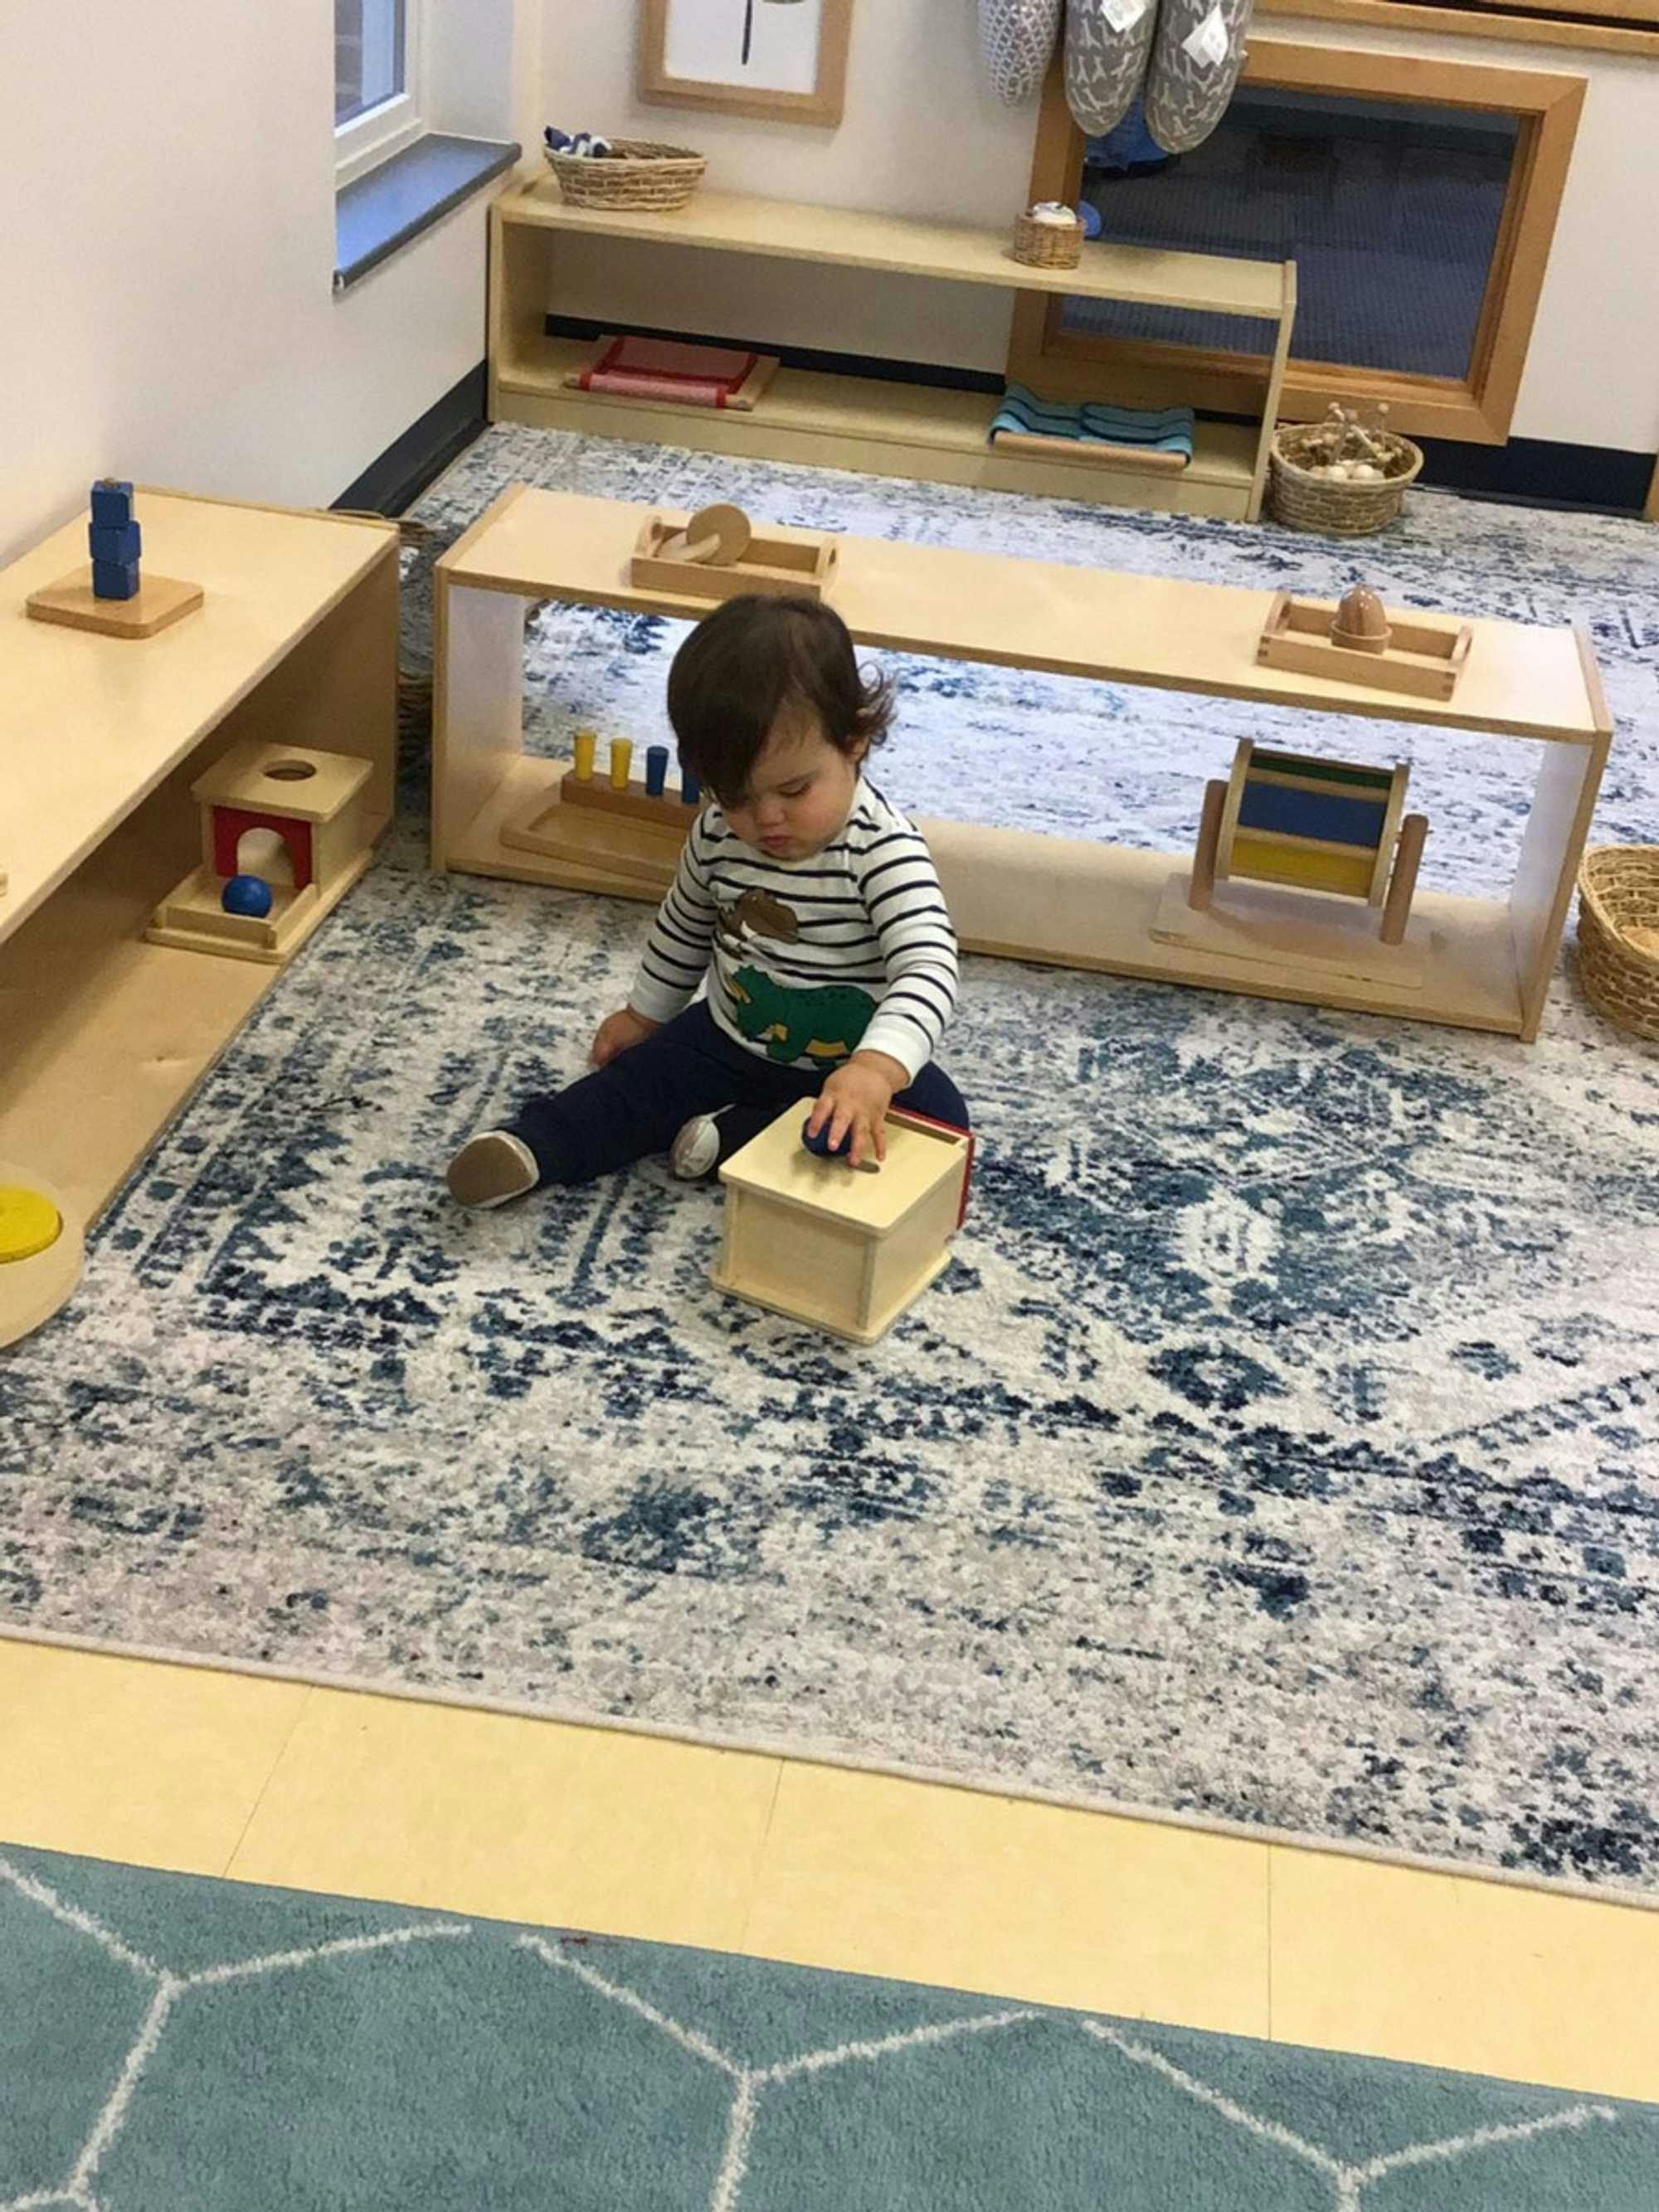 Children in a well-organized mixed-age Montessori classroom ponder over an activity using blocks of different sizes, classic Montessori classroom materials